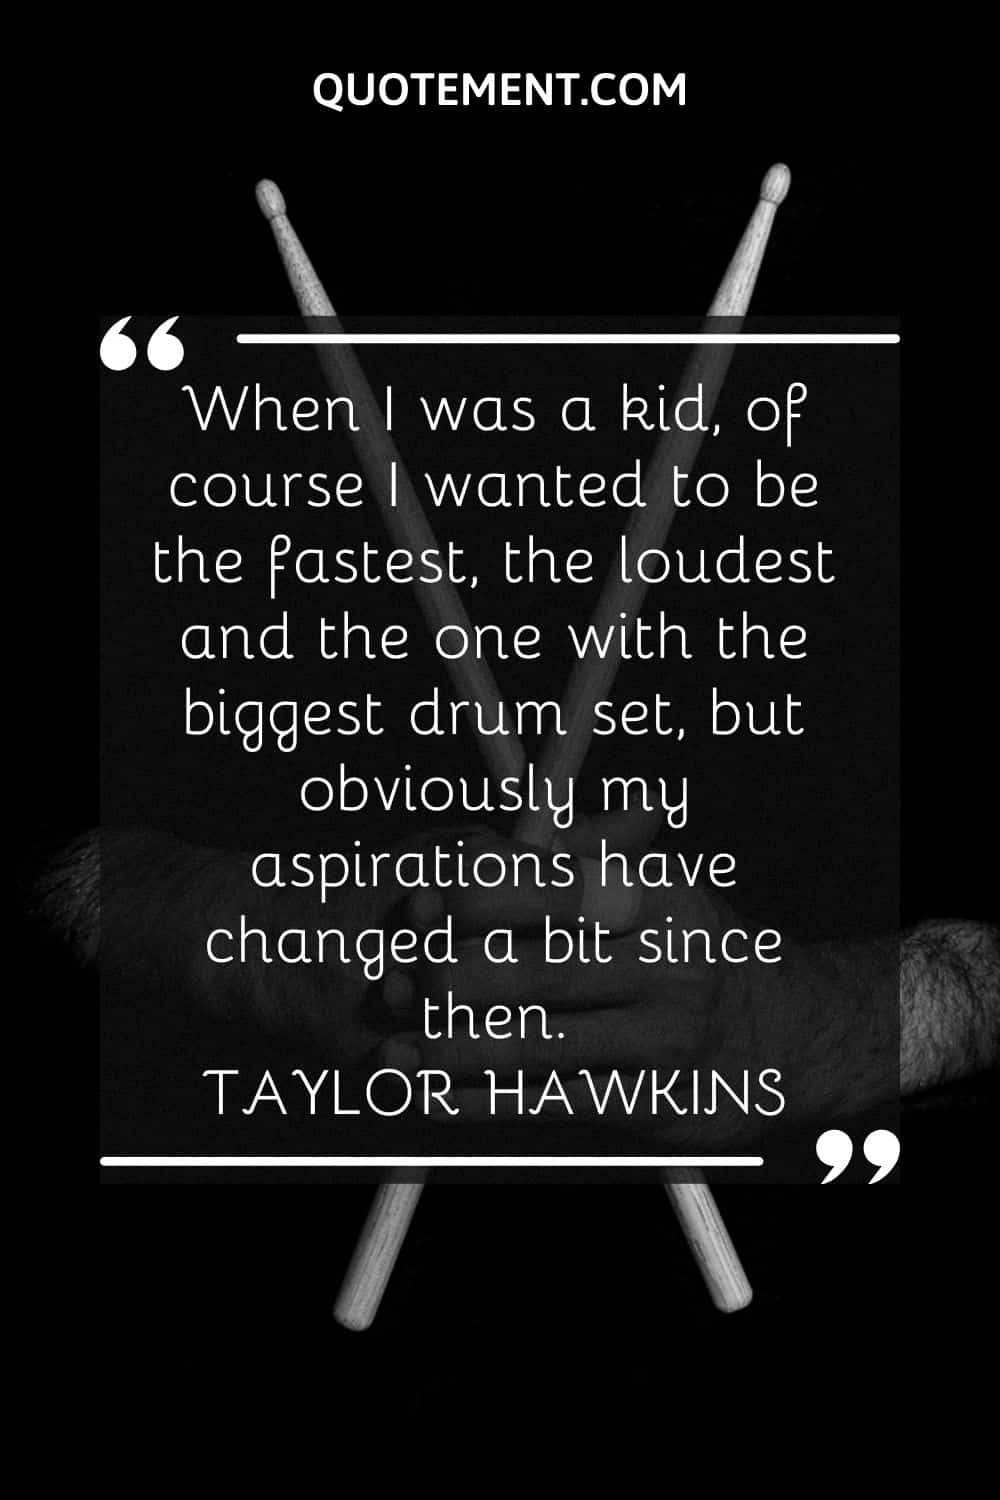 When I was a kid, of course I wanted to be the fastest, the loudest and the one with the biggest drum set